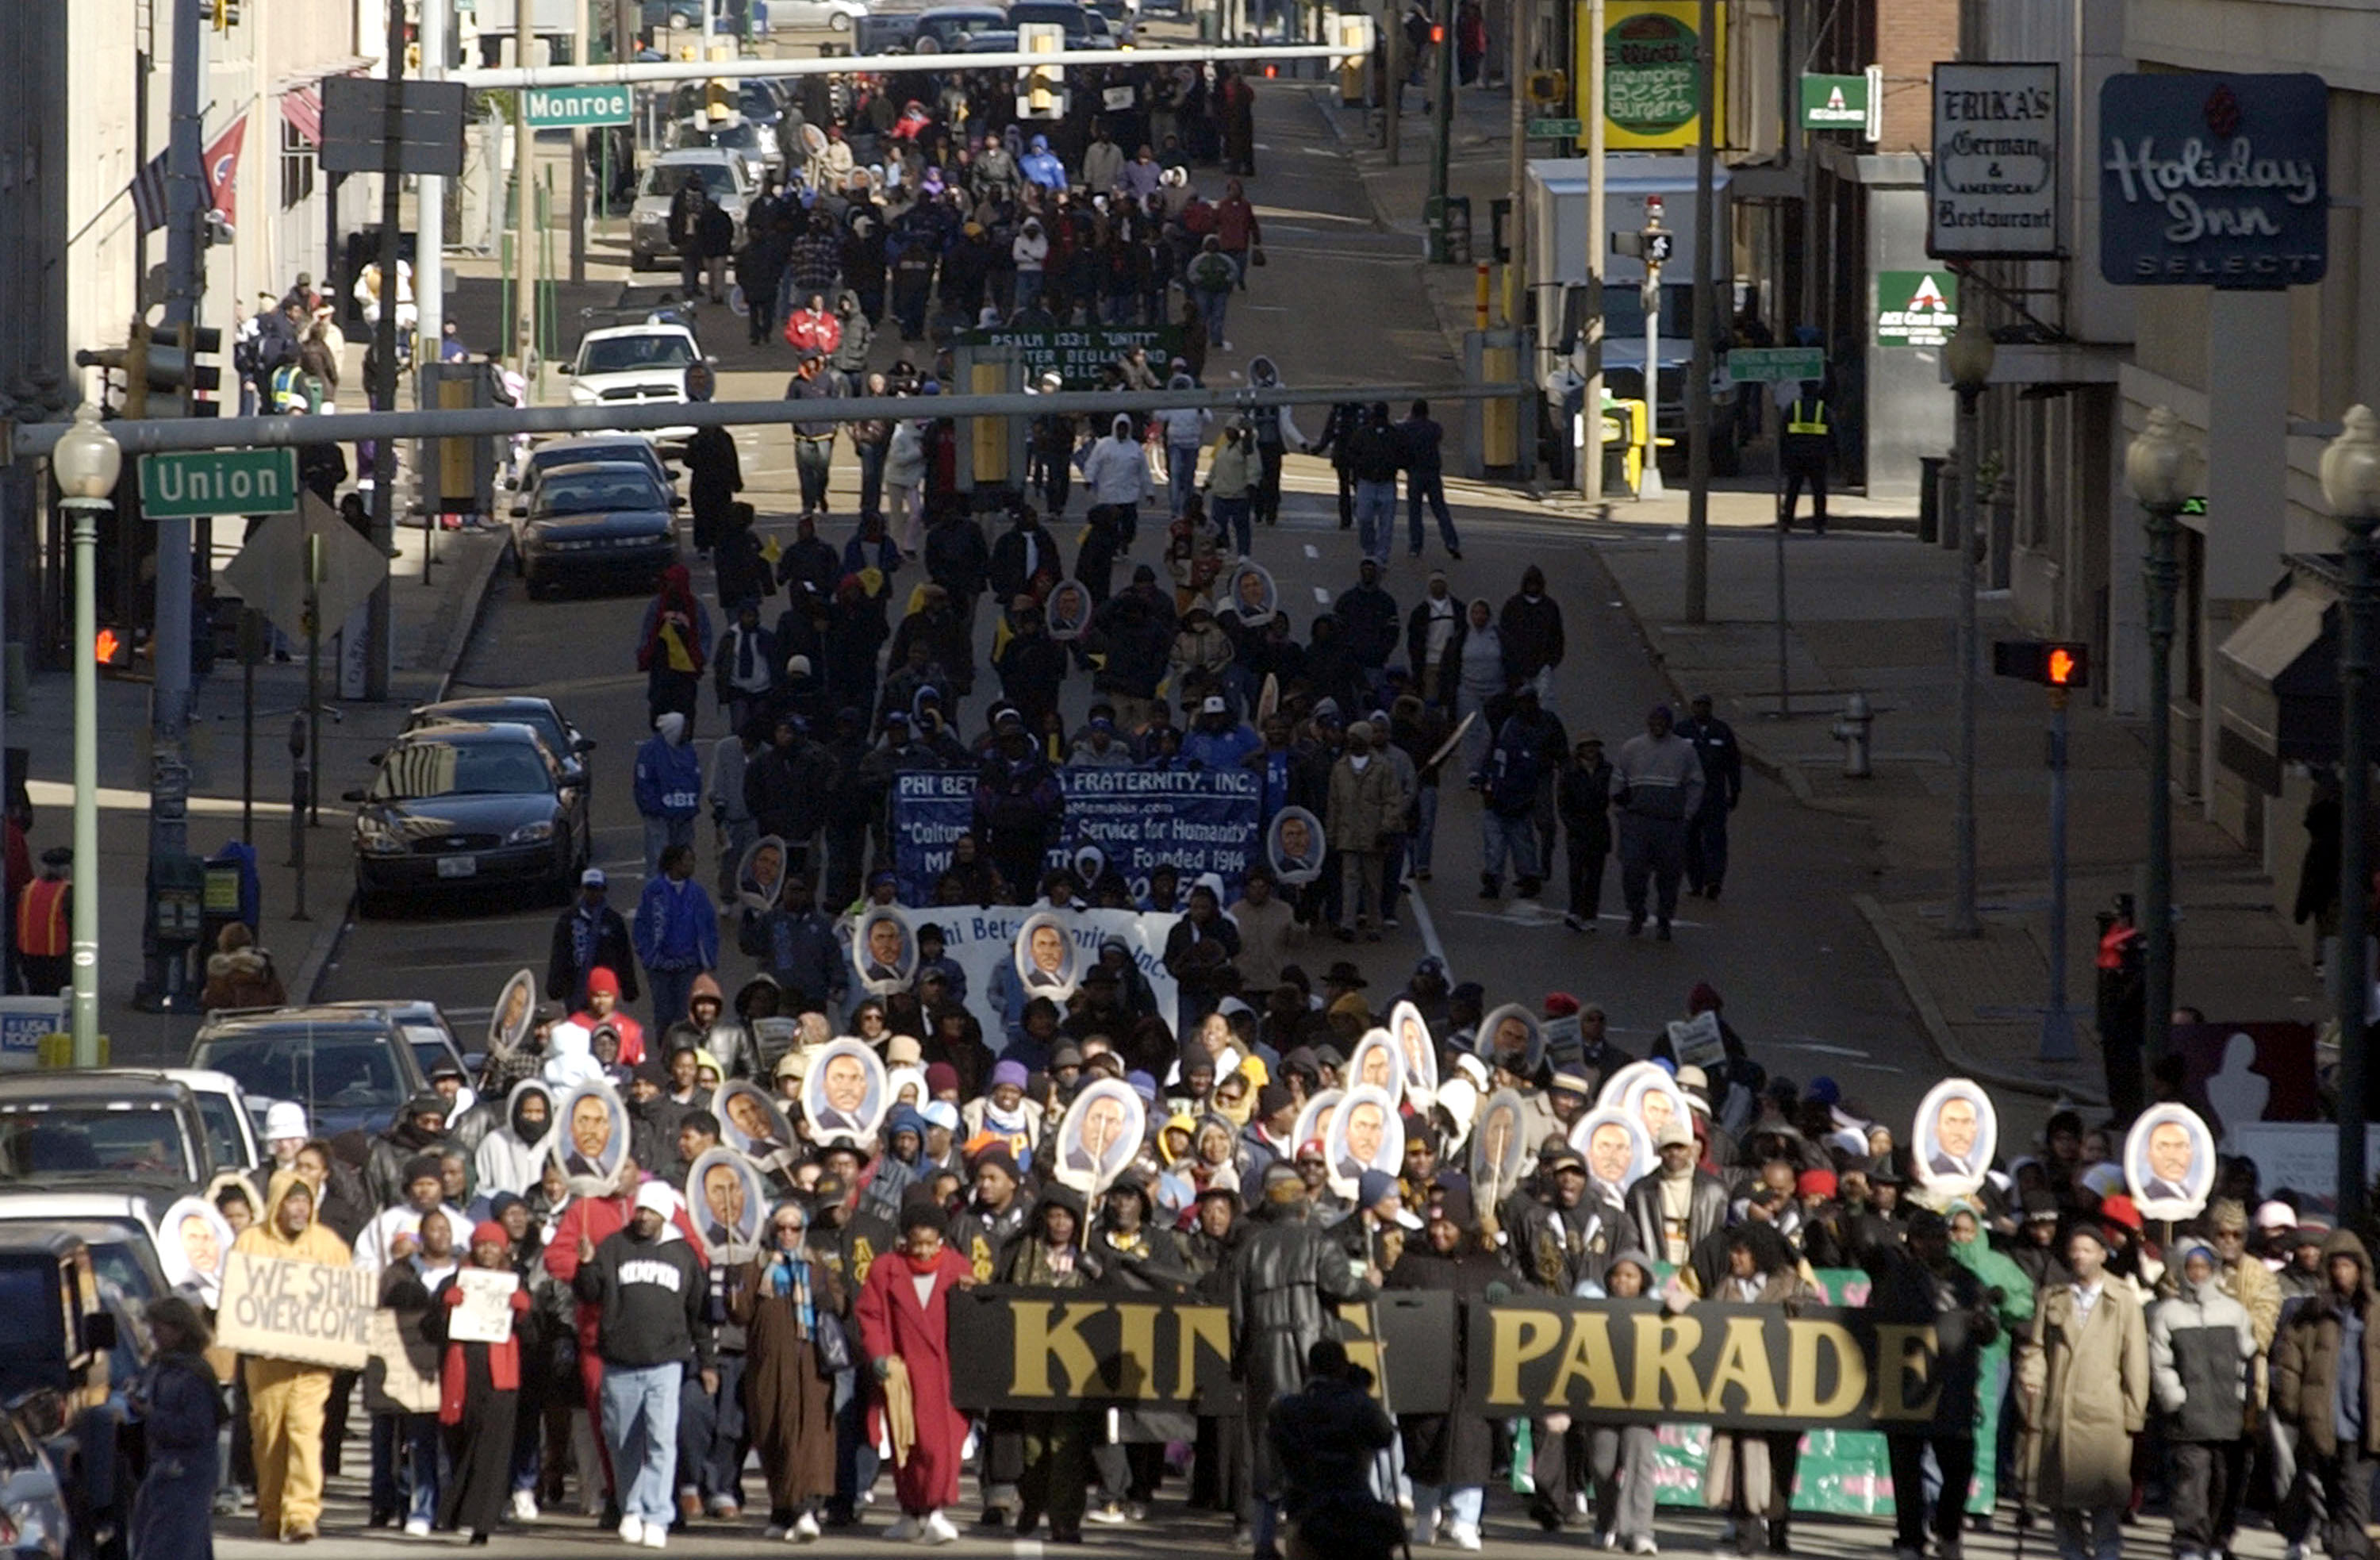 Marchers walk in a parade honoring the legacy of Dr. Martin Luther King, Jr. on January 17, 2005 in Memphis, Tenessee